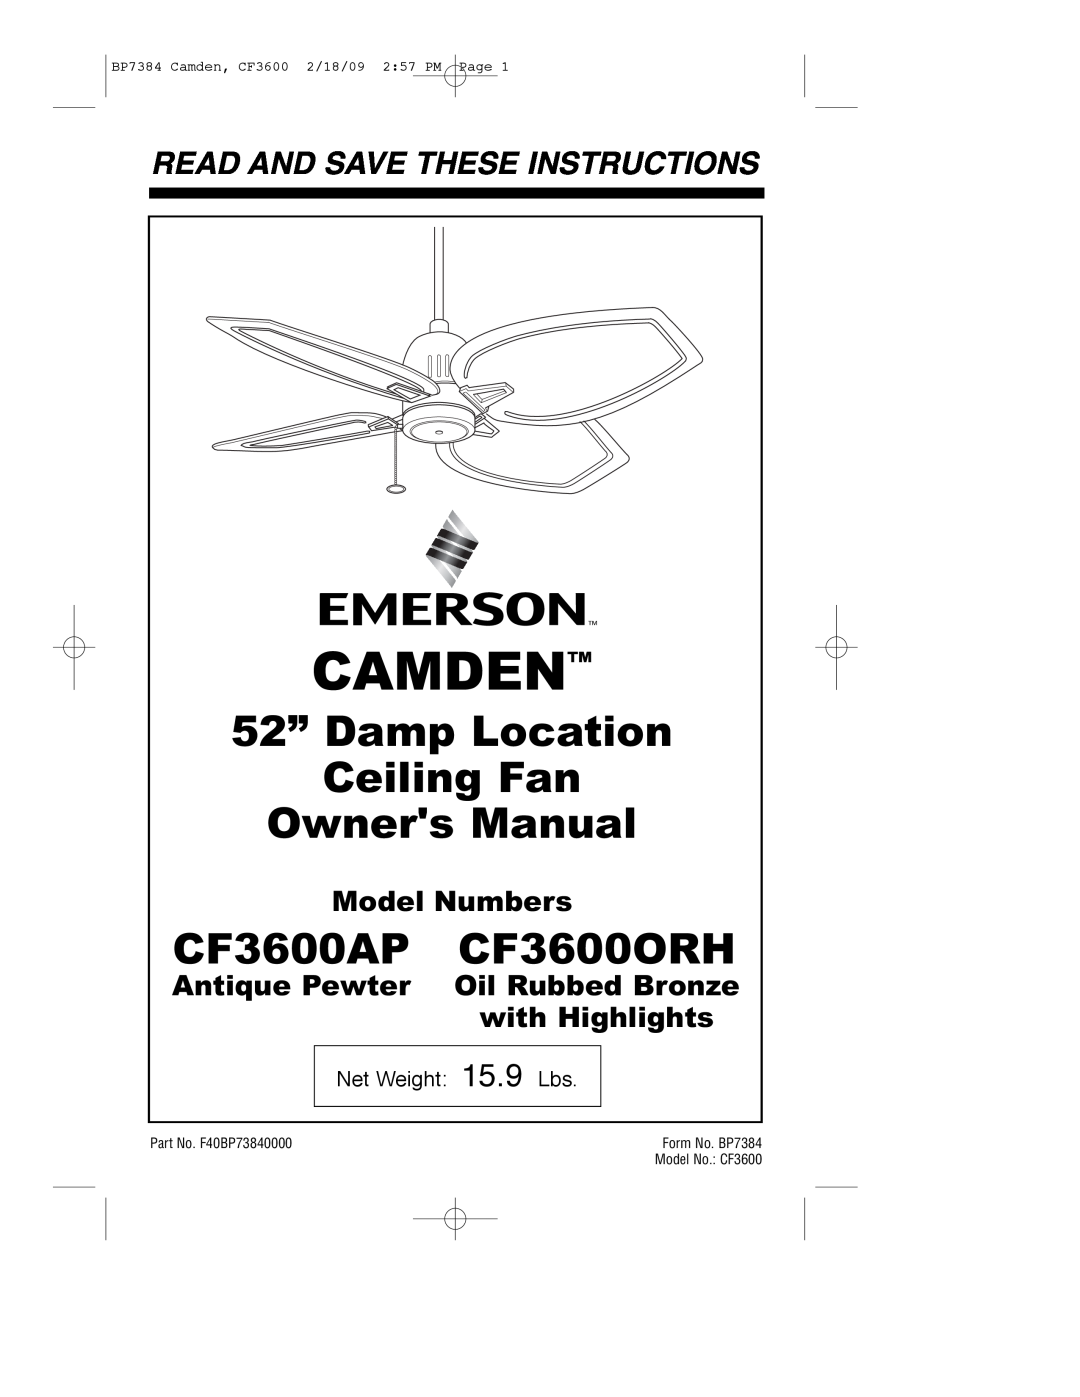 Emerson owner manual Camden, CF3600AP CF3600ORH, Read And Save These Instructions, Model Numbers, Net Weight 15.9 Lbs 